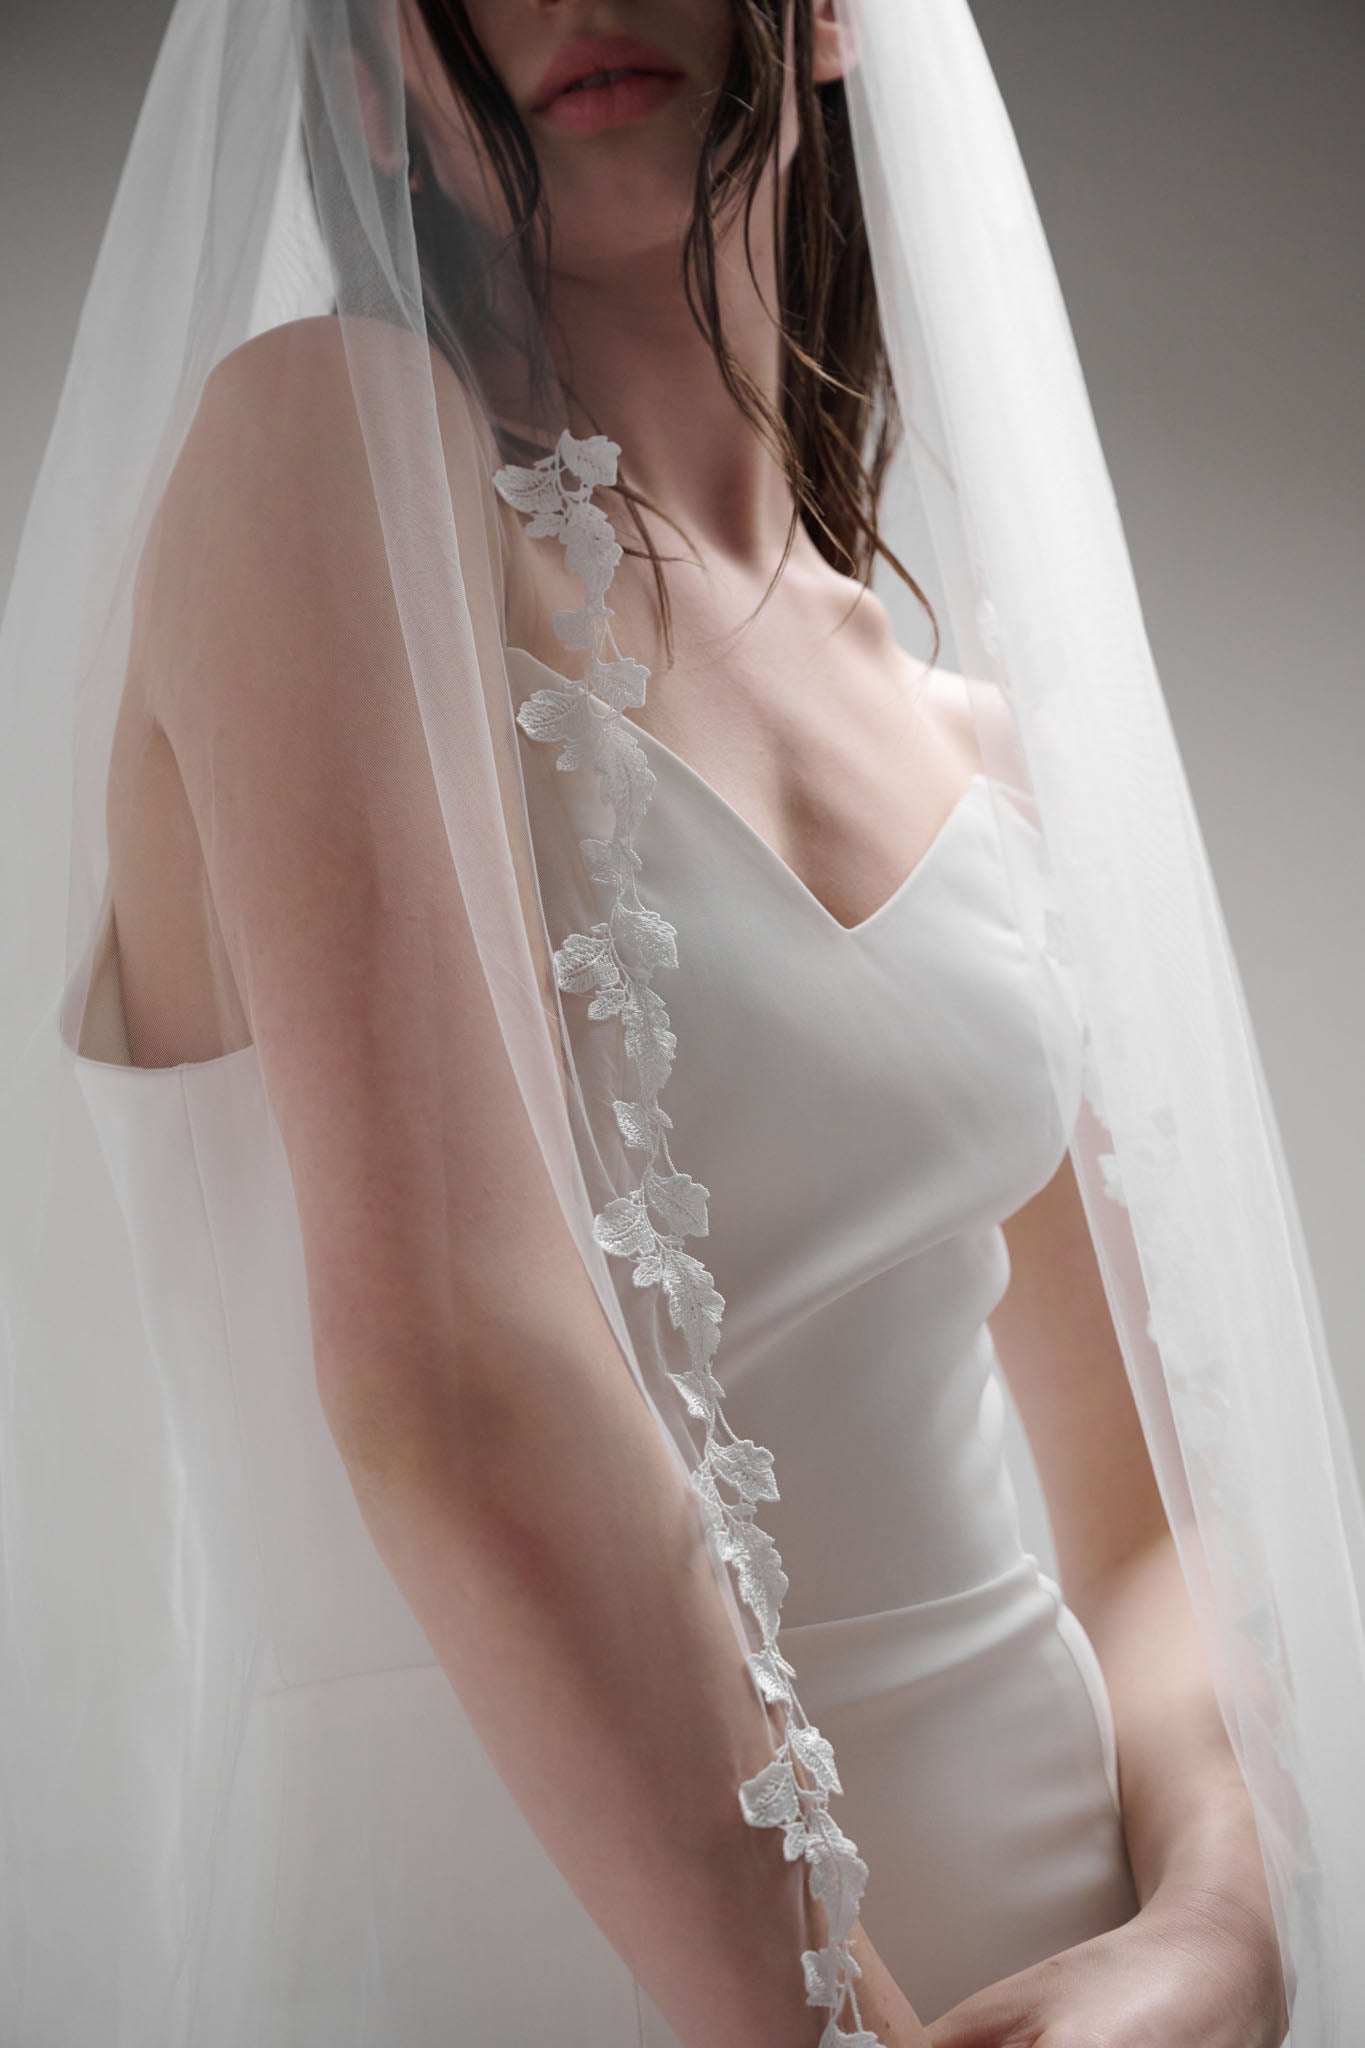 Soft tulle veil trimmed with a delicate ivy and leafy vine lace - perfect for the modern bride with an affinity for natural and feminine aesthetics